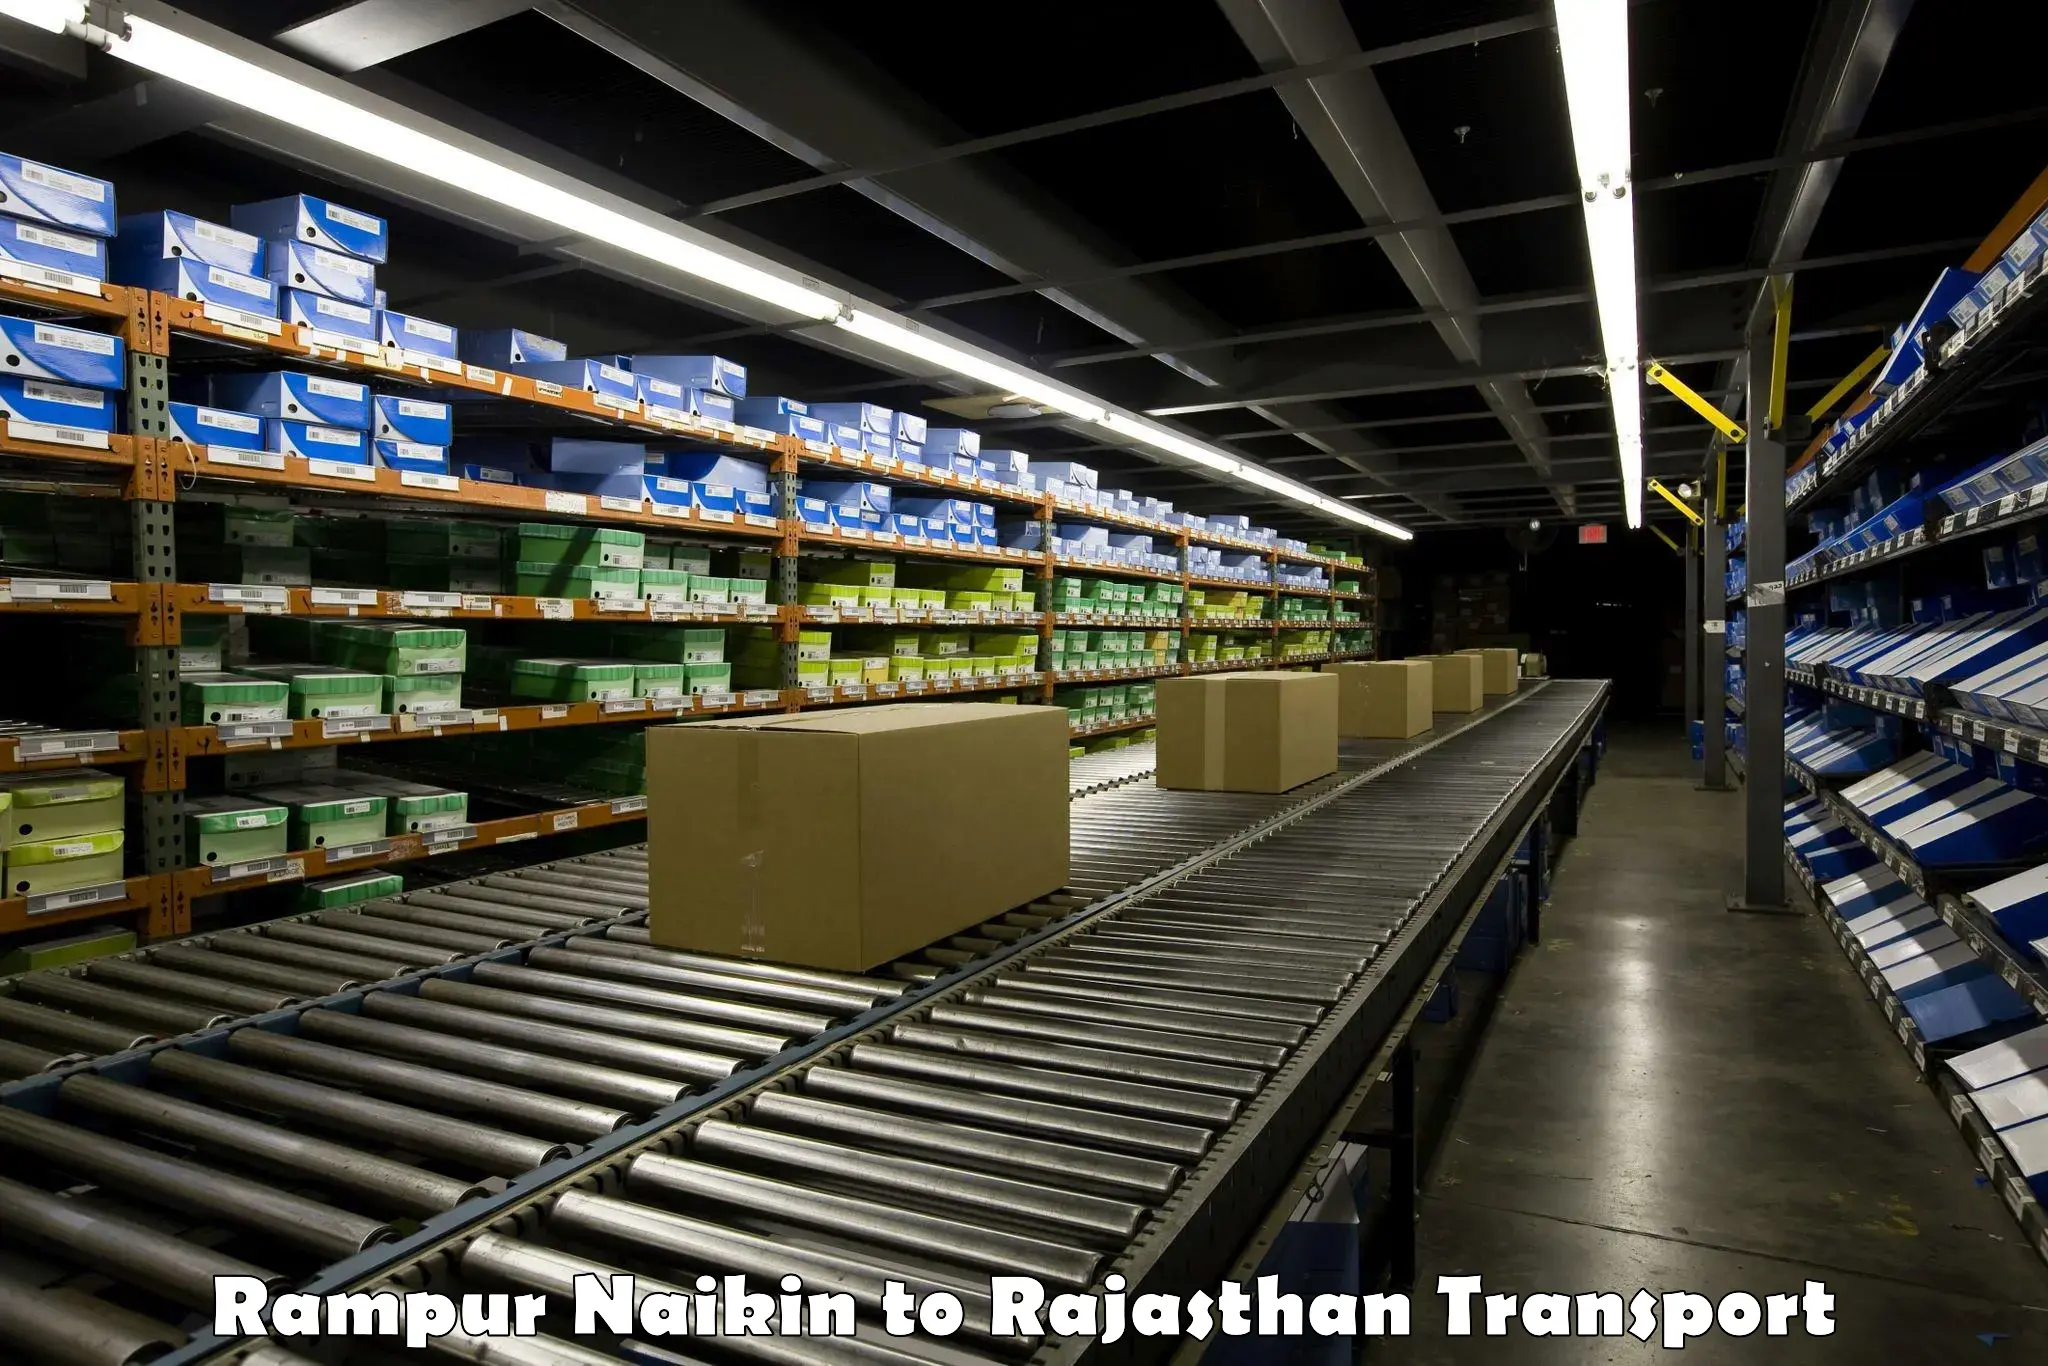 Truck transport companies in India Rampur Naikin to Yeswanthapur